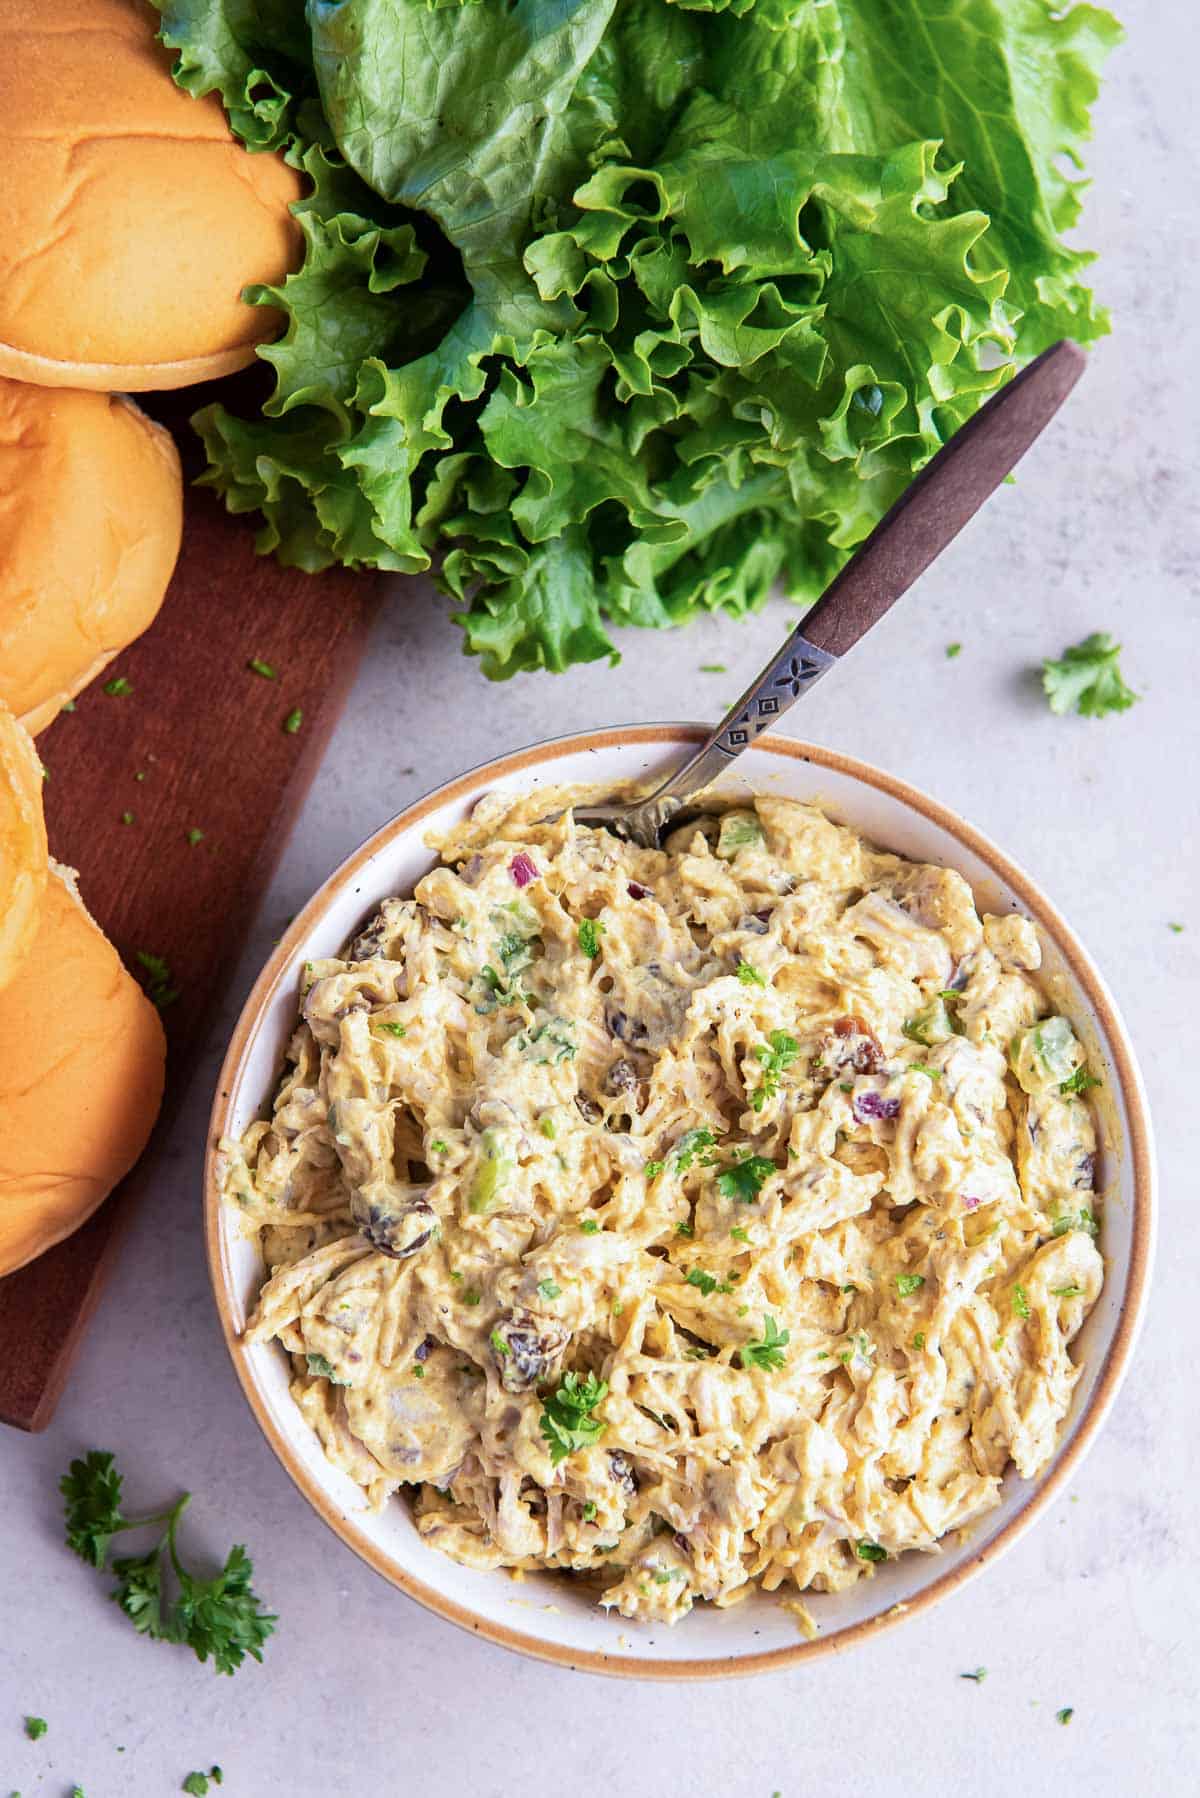 Curry chicken salad in a bowl with a spoon next to sandwich rolls and lettuce.